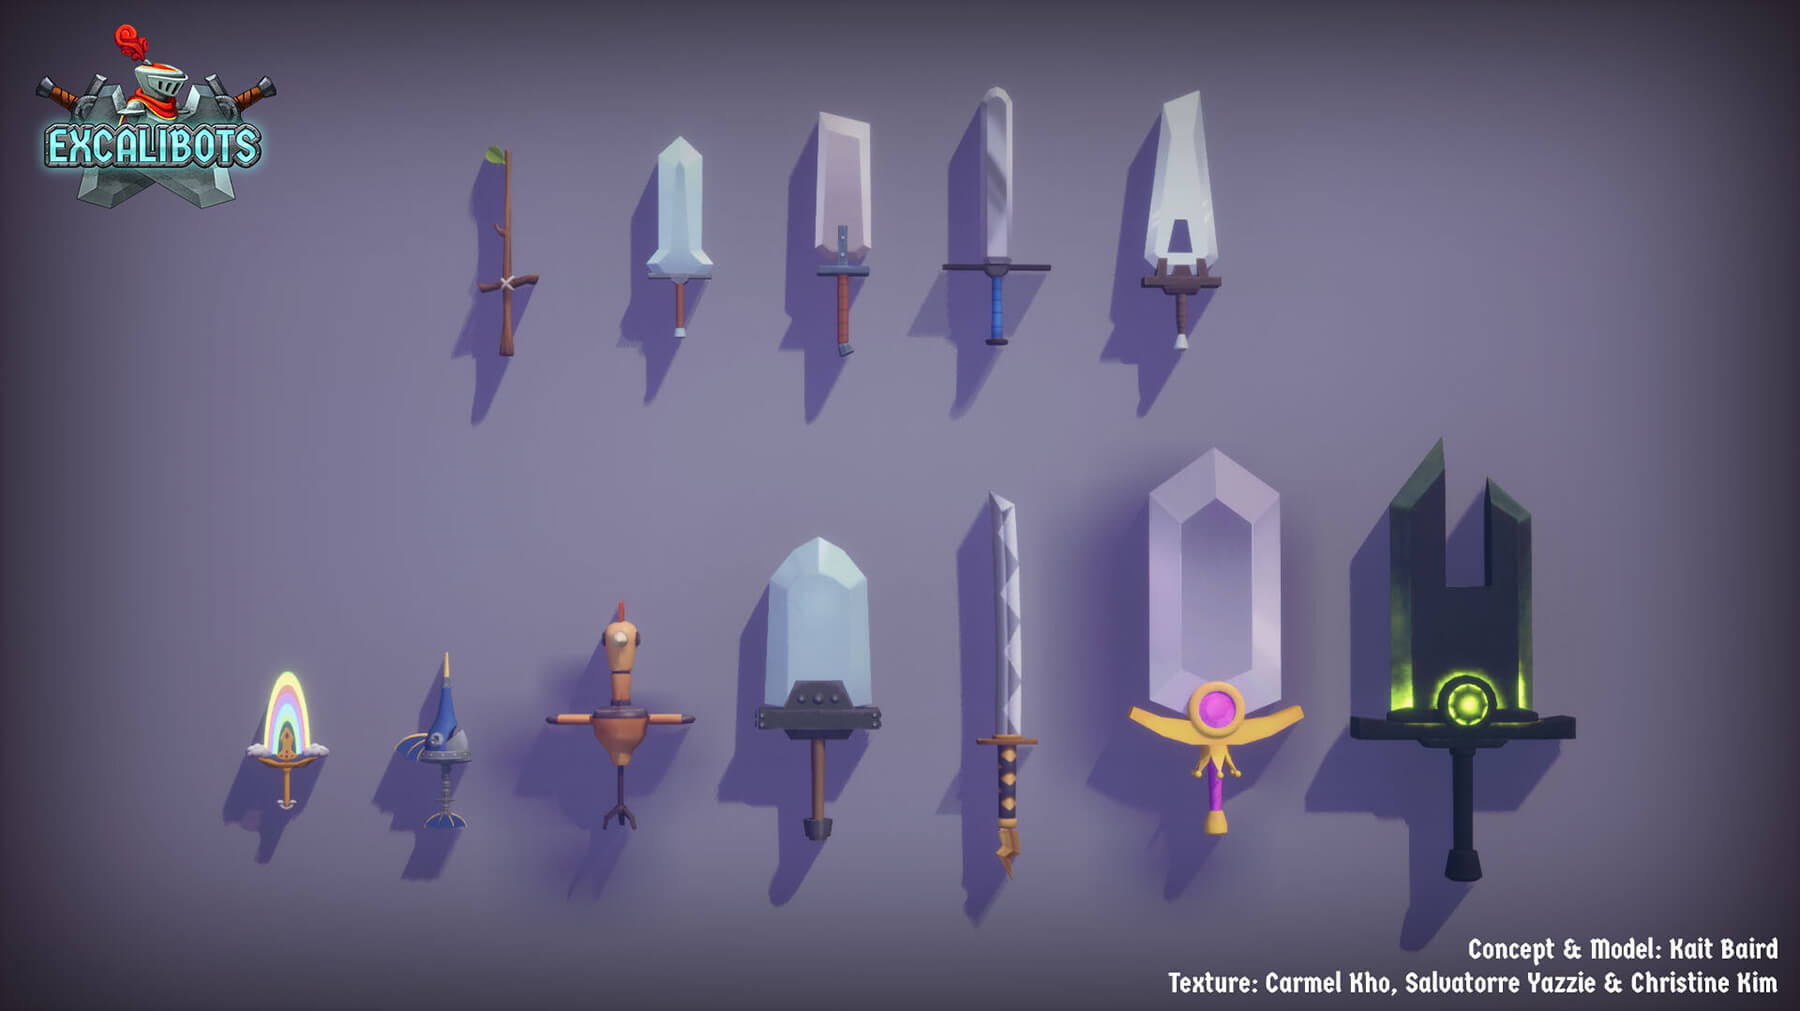 Concept and 3D model art of various swords from the game Excalibots